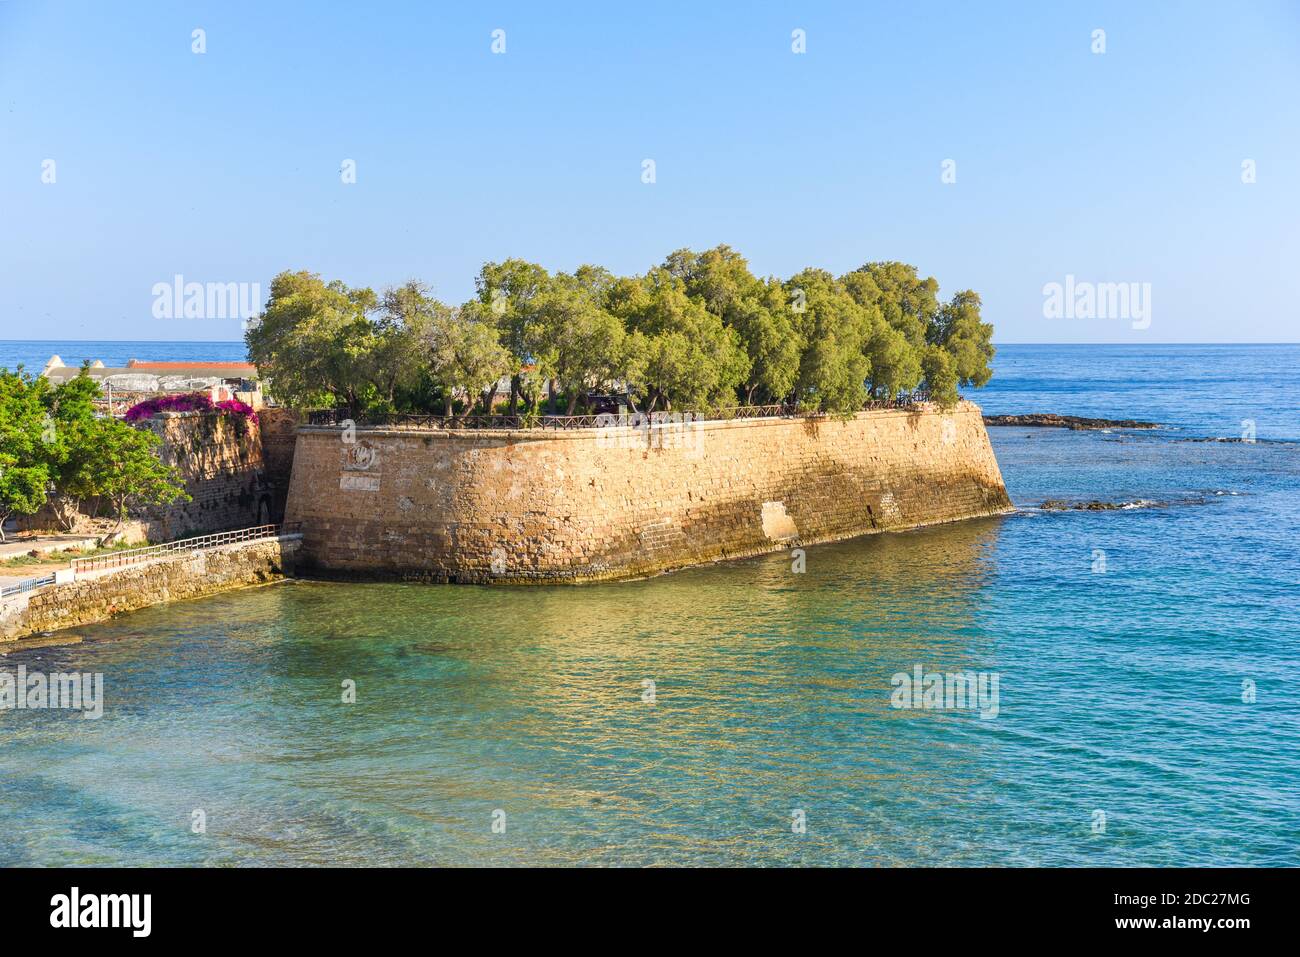 Venetian fortification in Chania on Crete Stock Photo